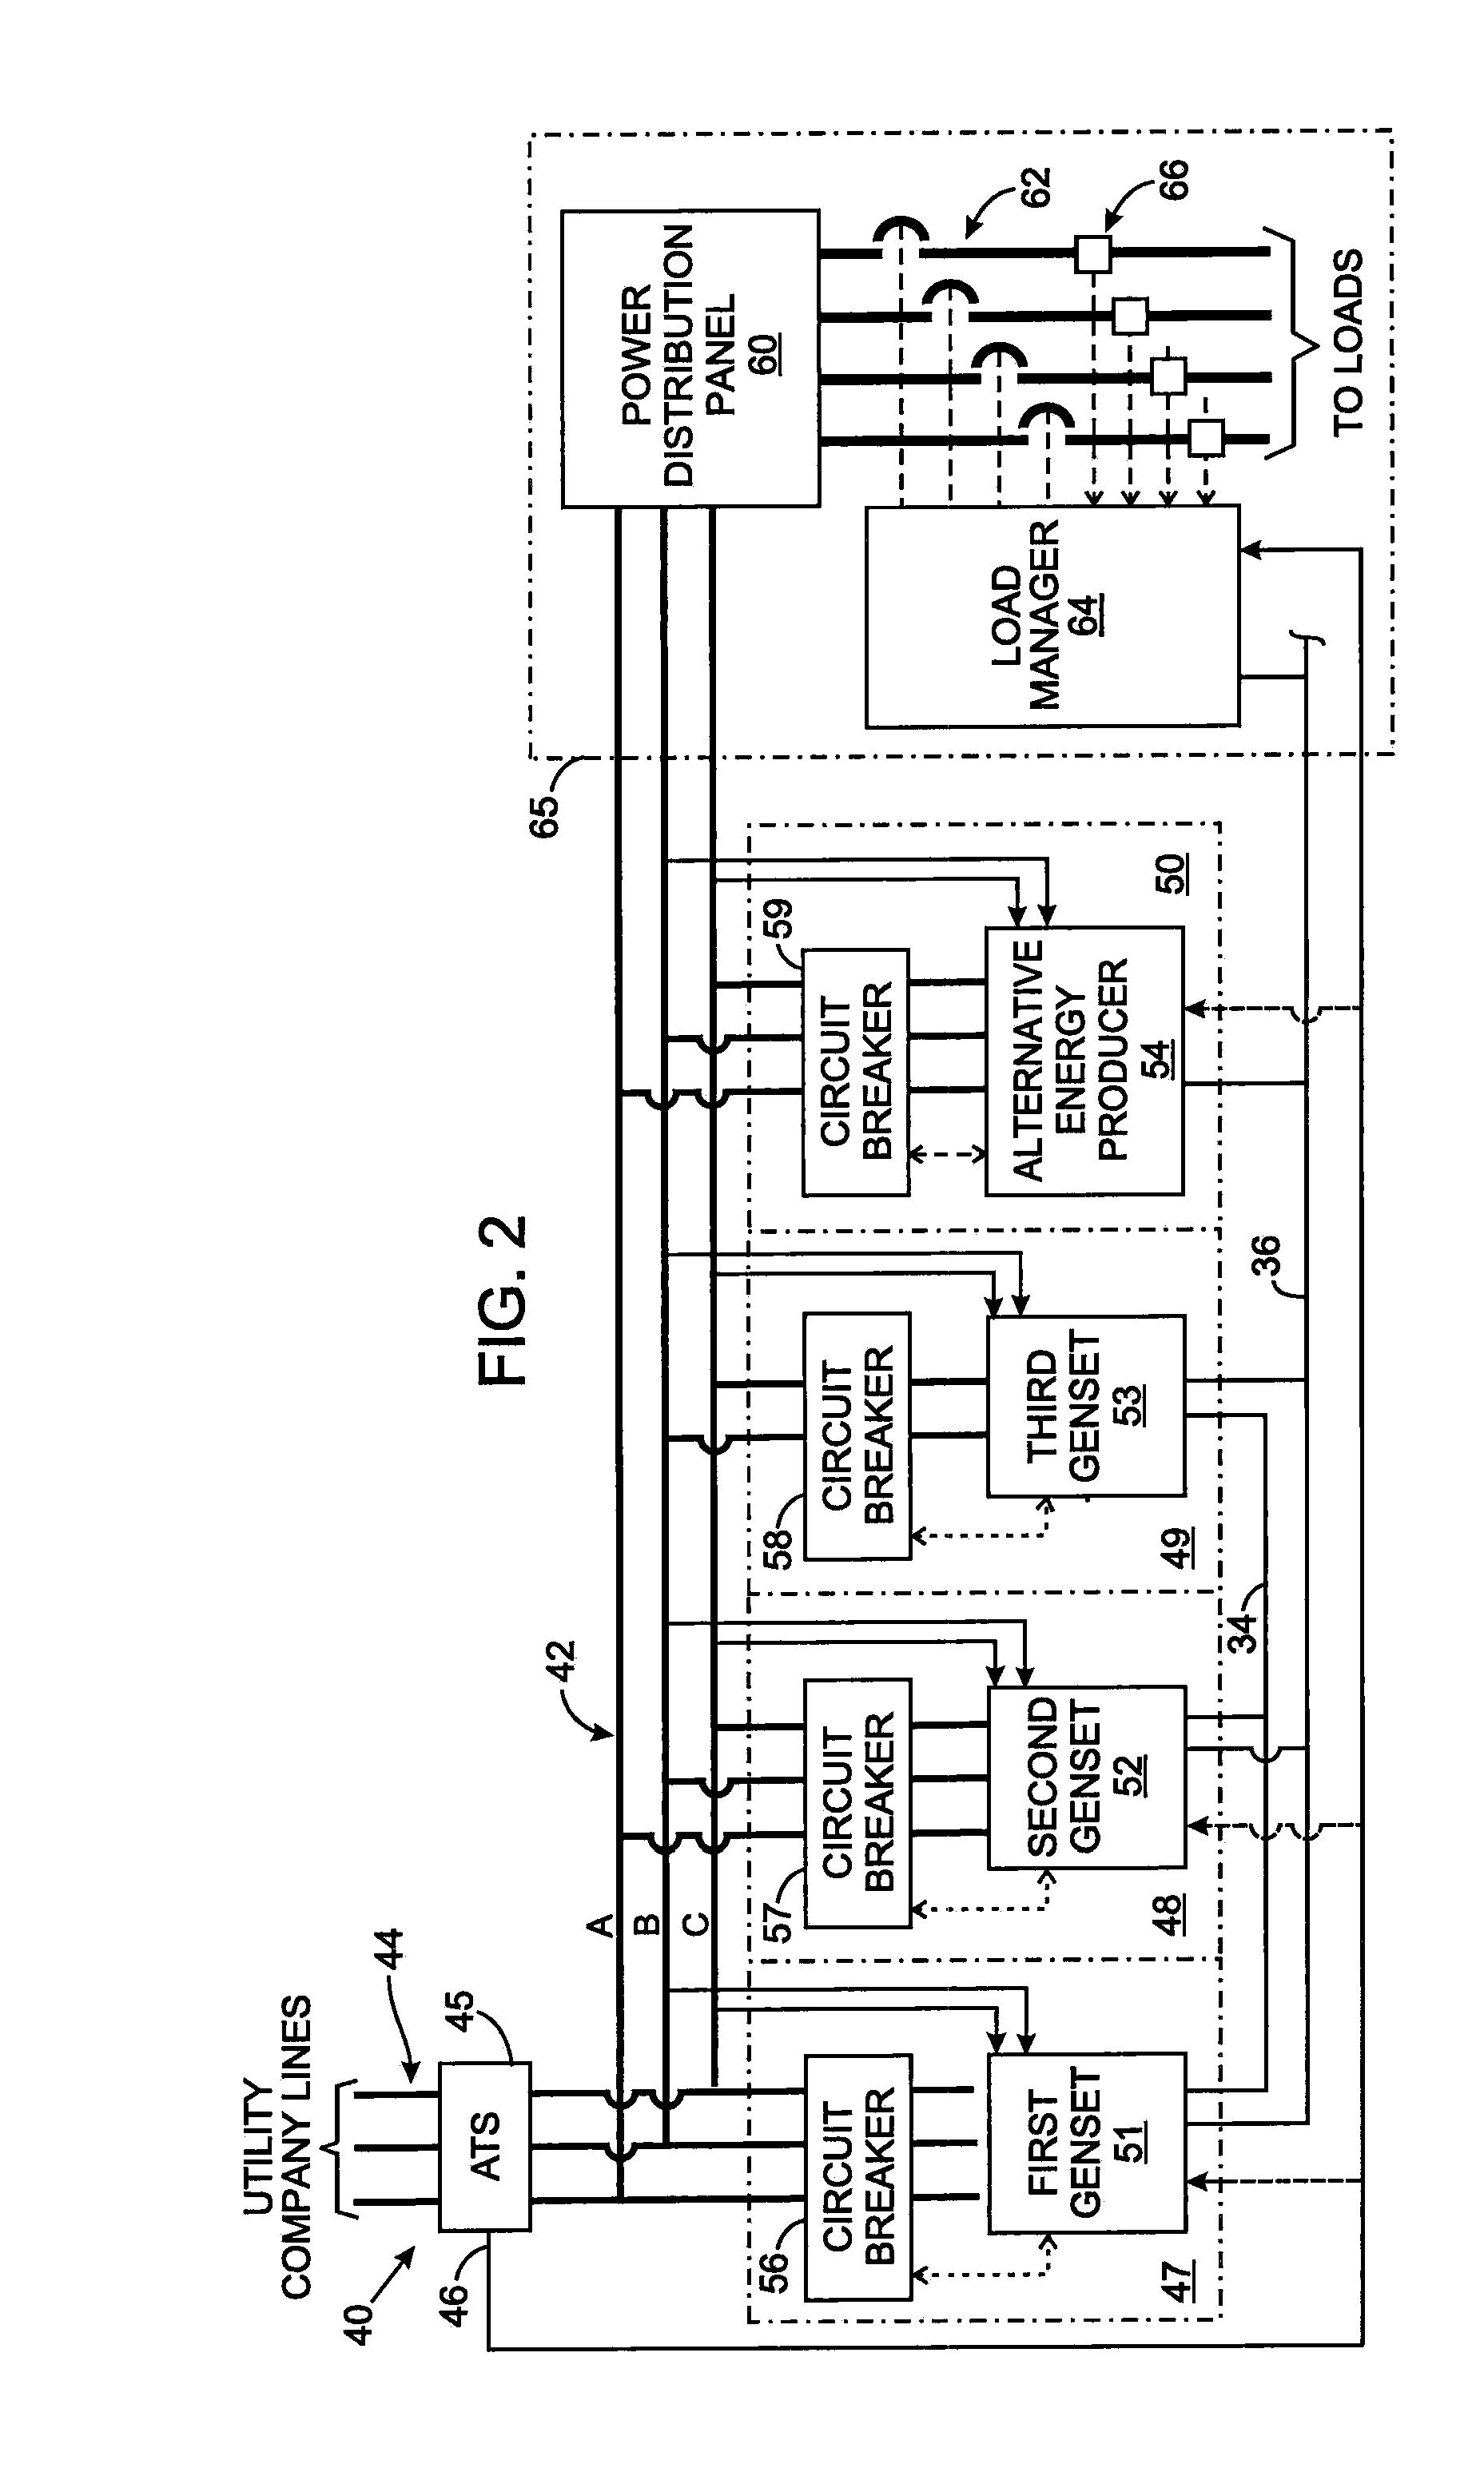 System and method for paralleling electrical power generators